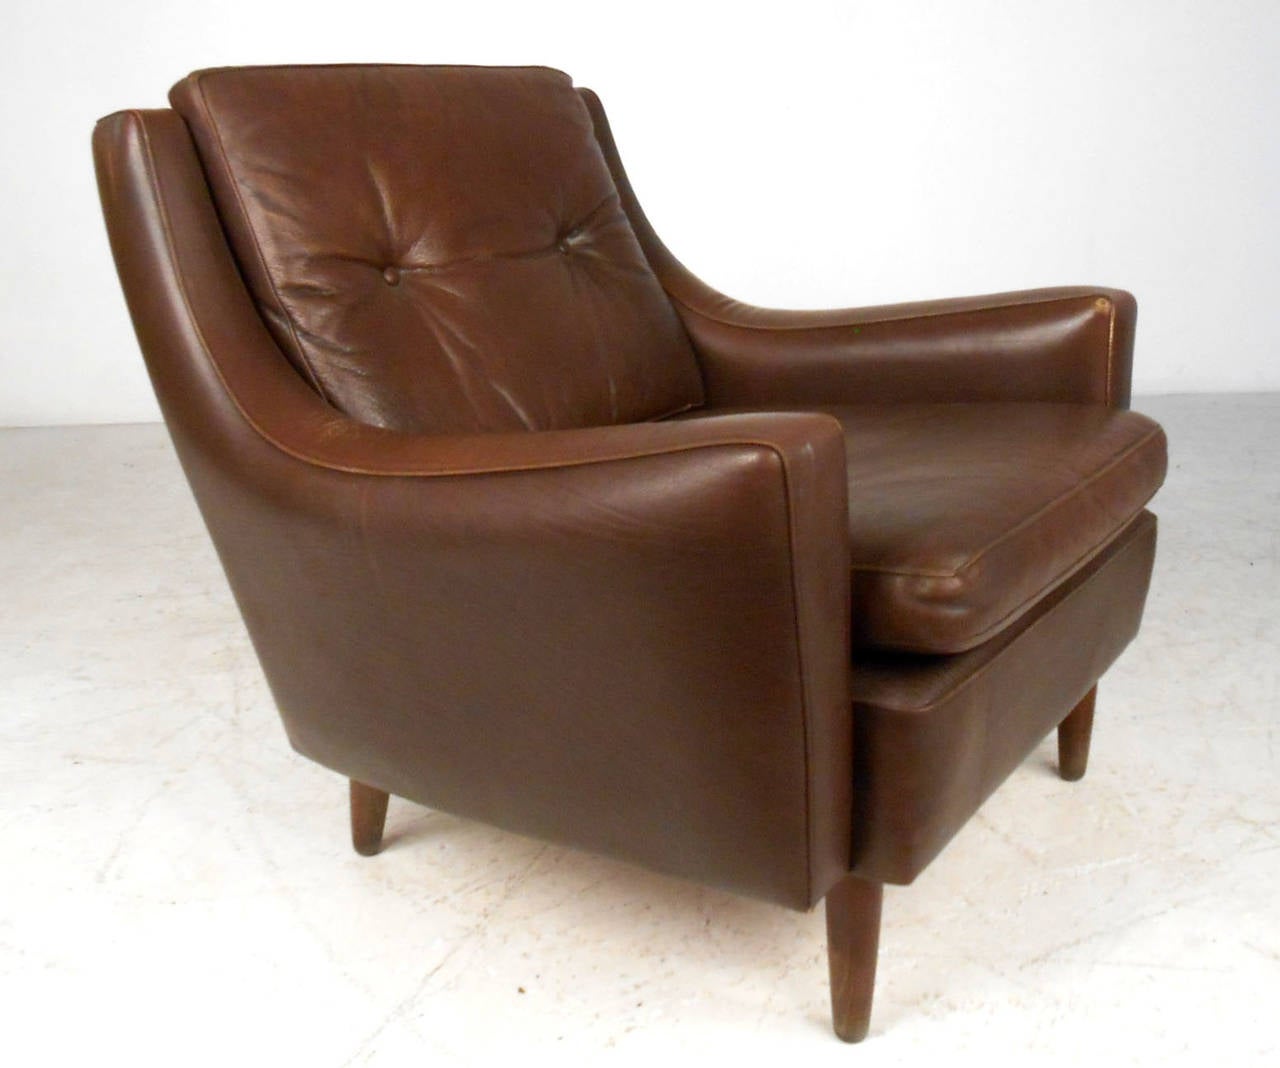 This wonderful low club chair combines classic vintage leather with sturdy walnut frame. Uniquely shaped armrest/seatback design makes this an extremely comfortable seating addition. Uniquely tufted upholstery adds to the chairs mid-century appeal.